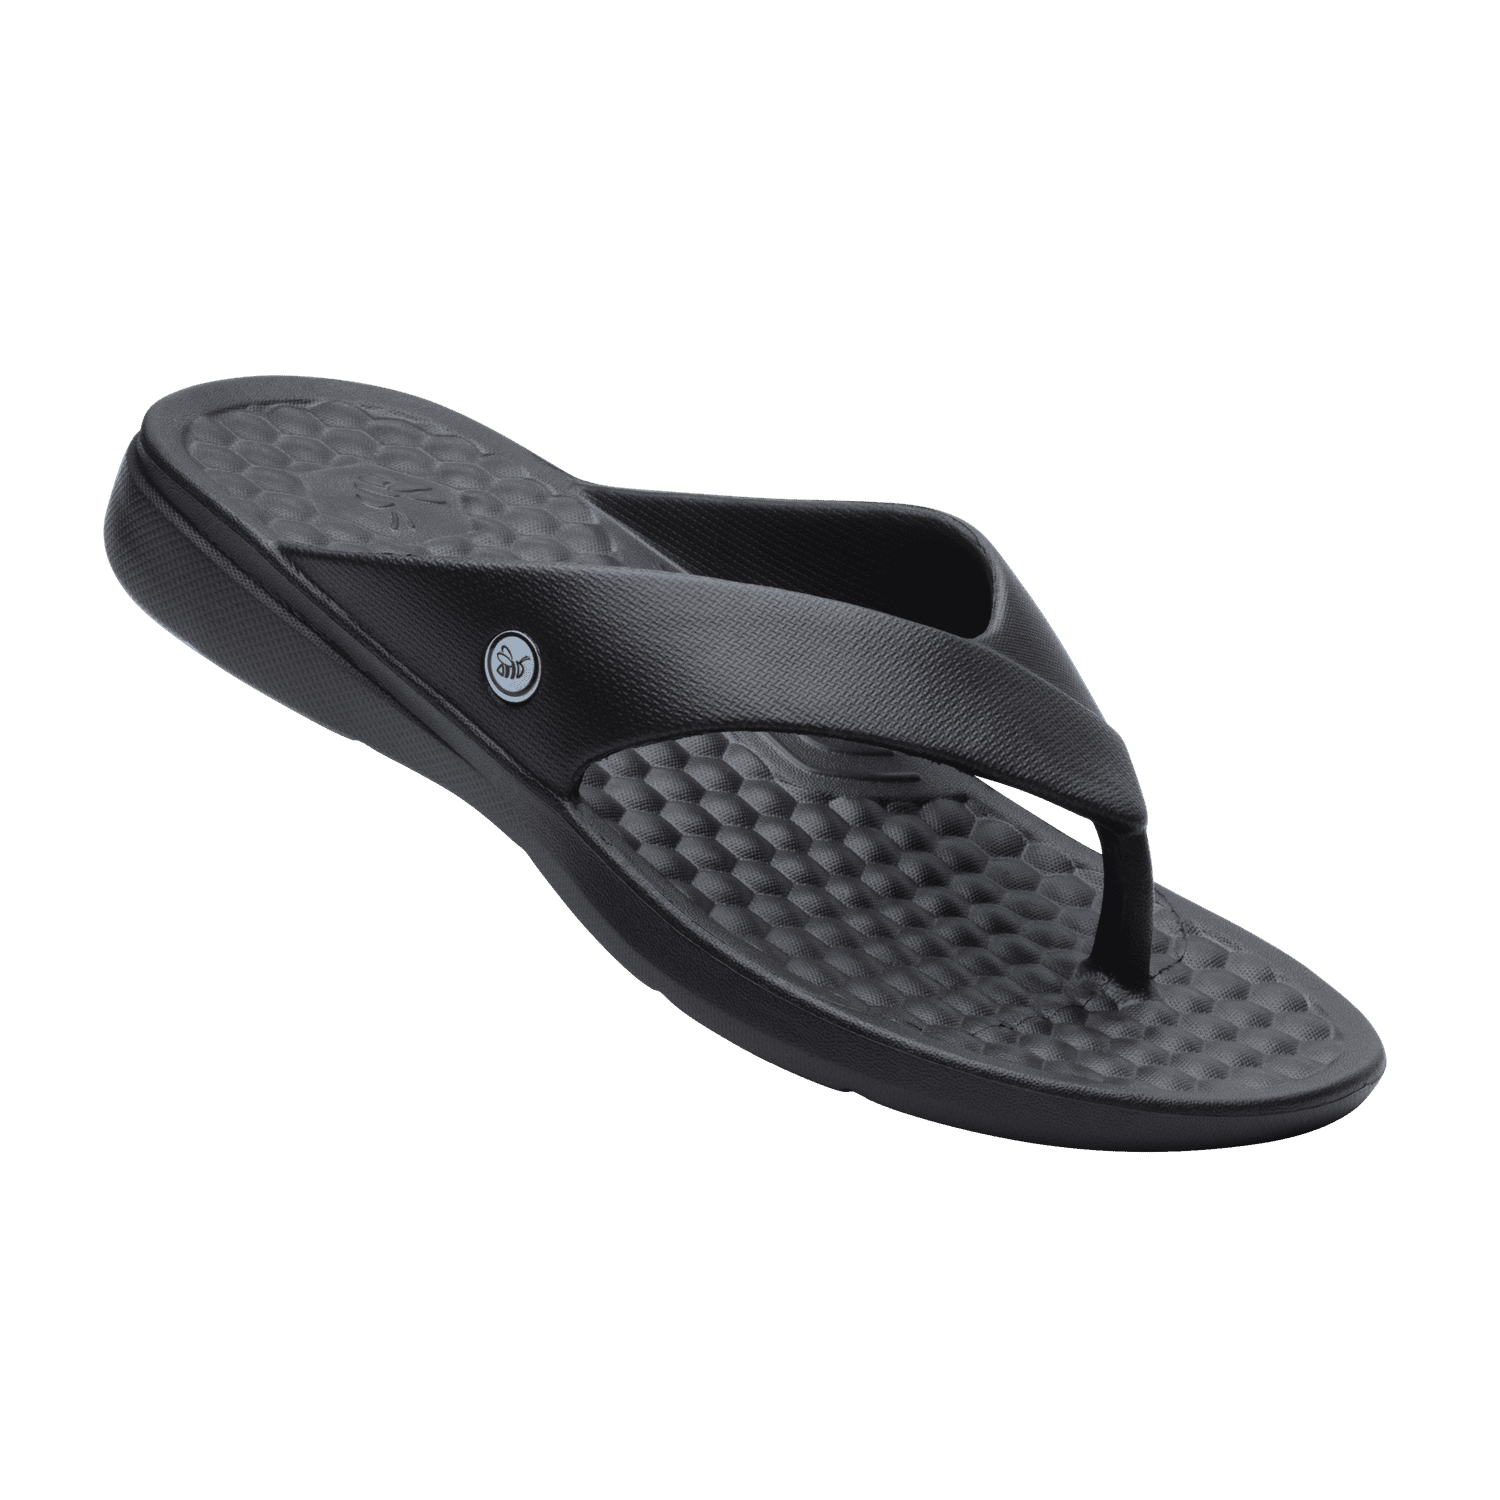 Joybees Casual Flip Flop | Comfortable, supportive, sporty and easy to ...